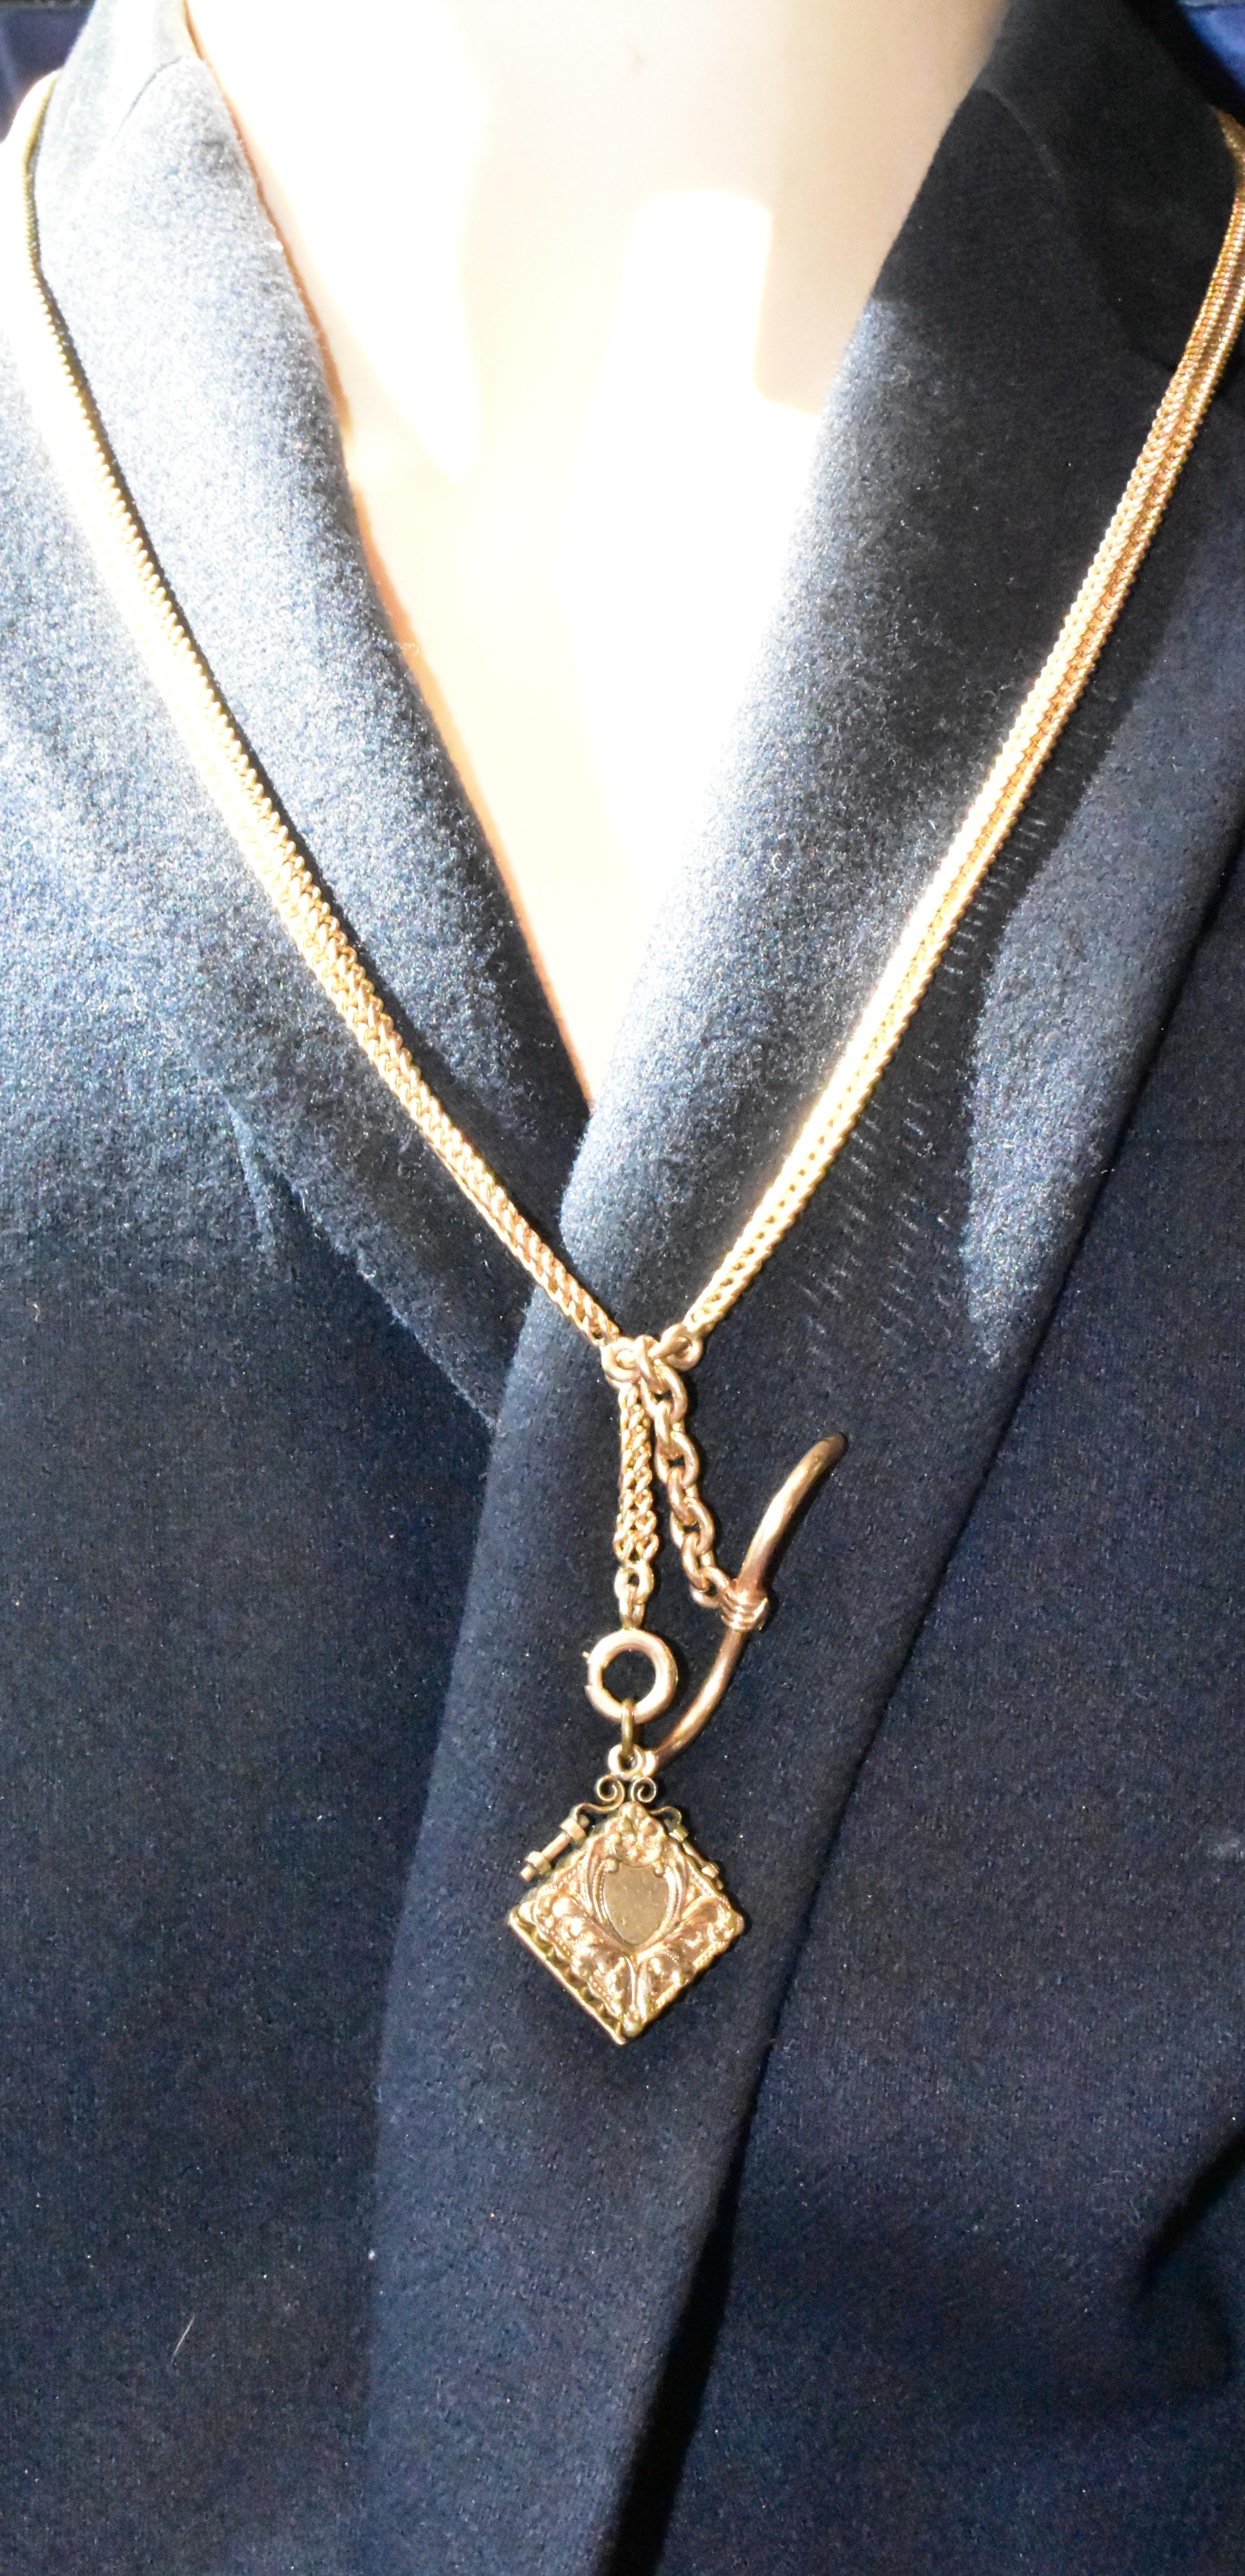 Antique Gold Chain with Fobs, circa 1900 3